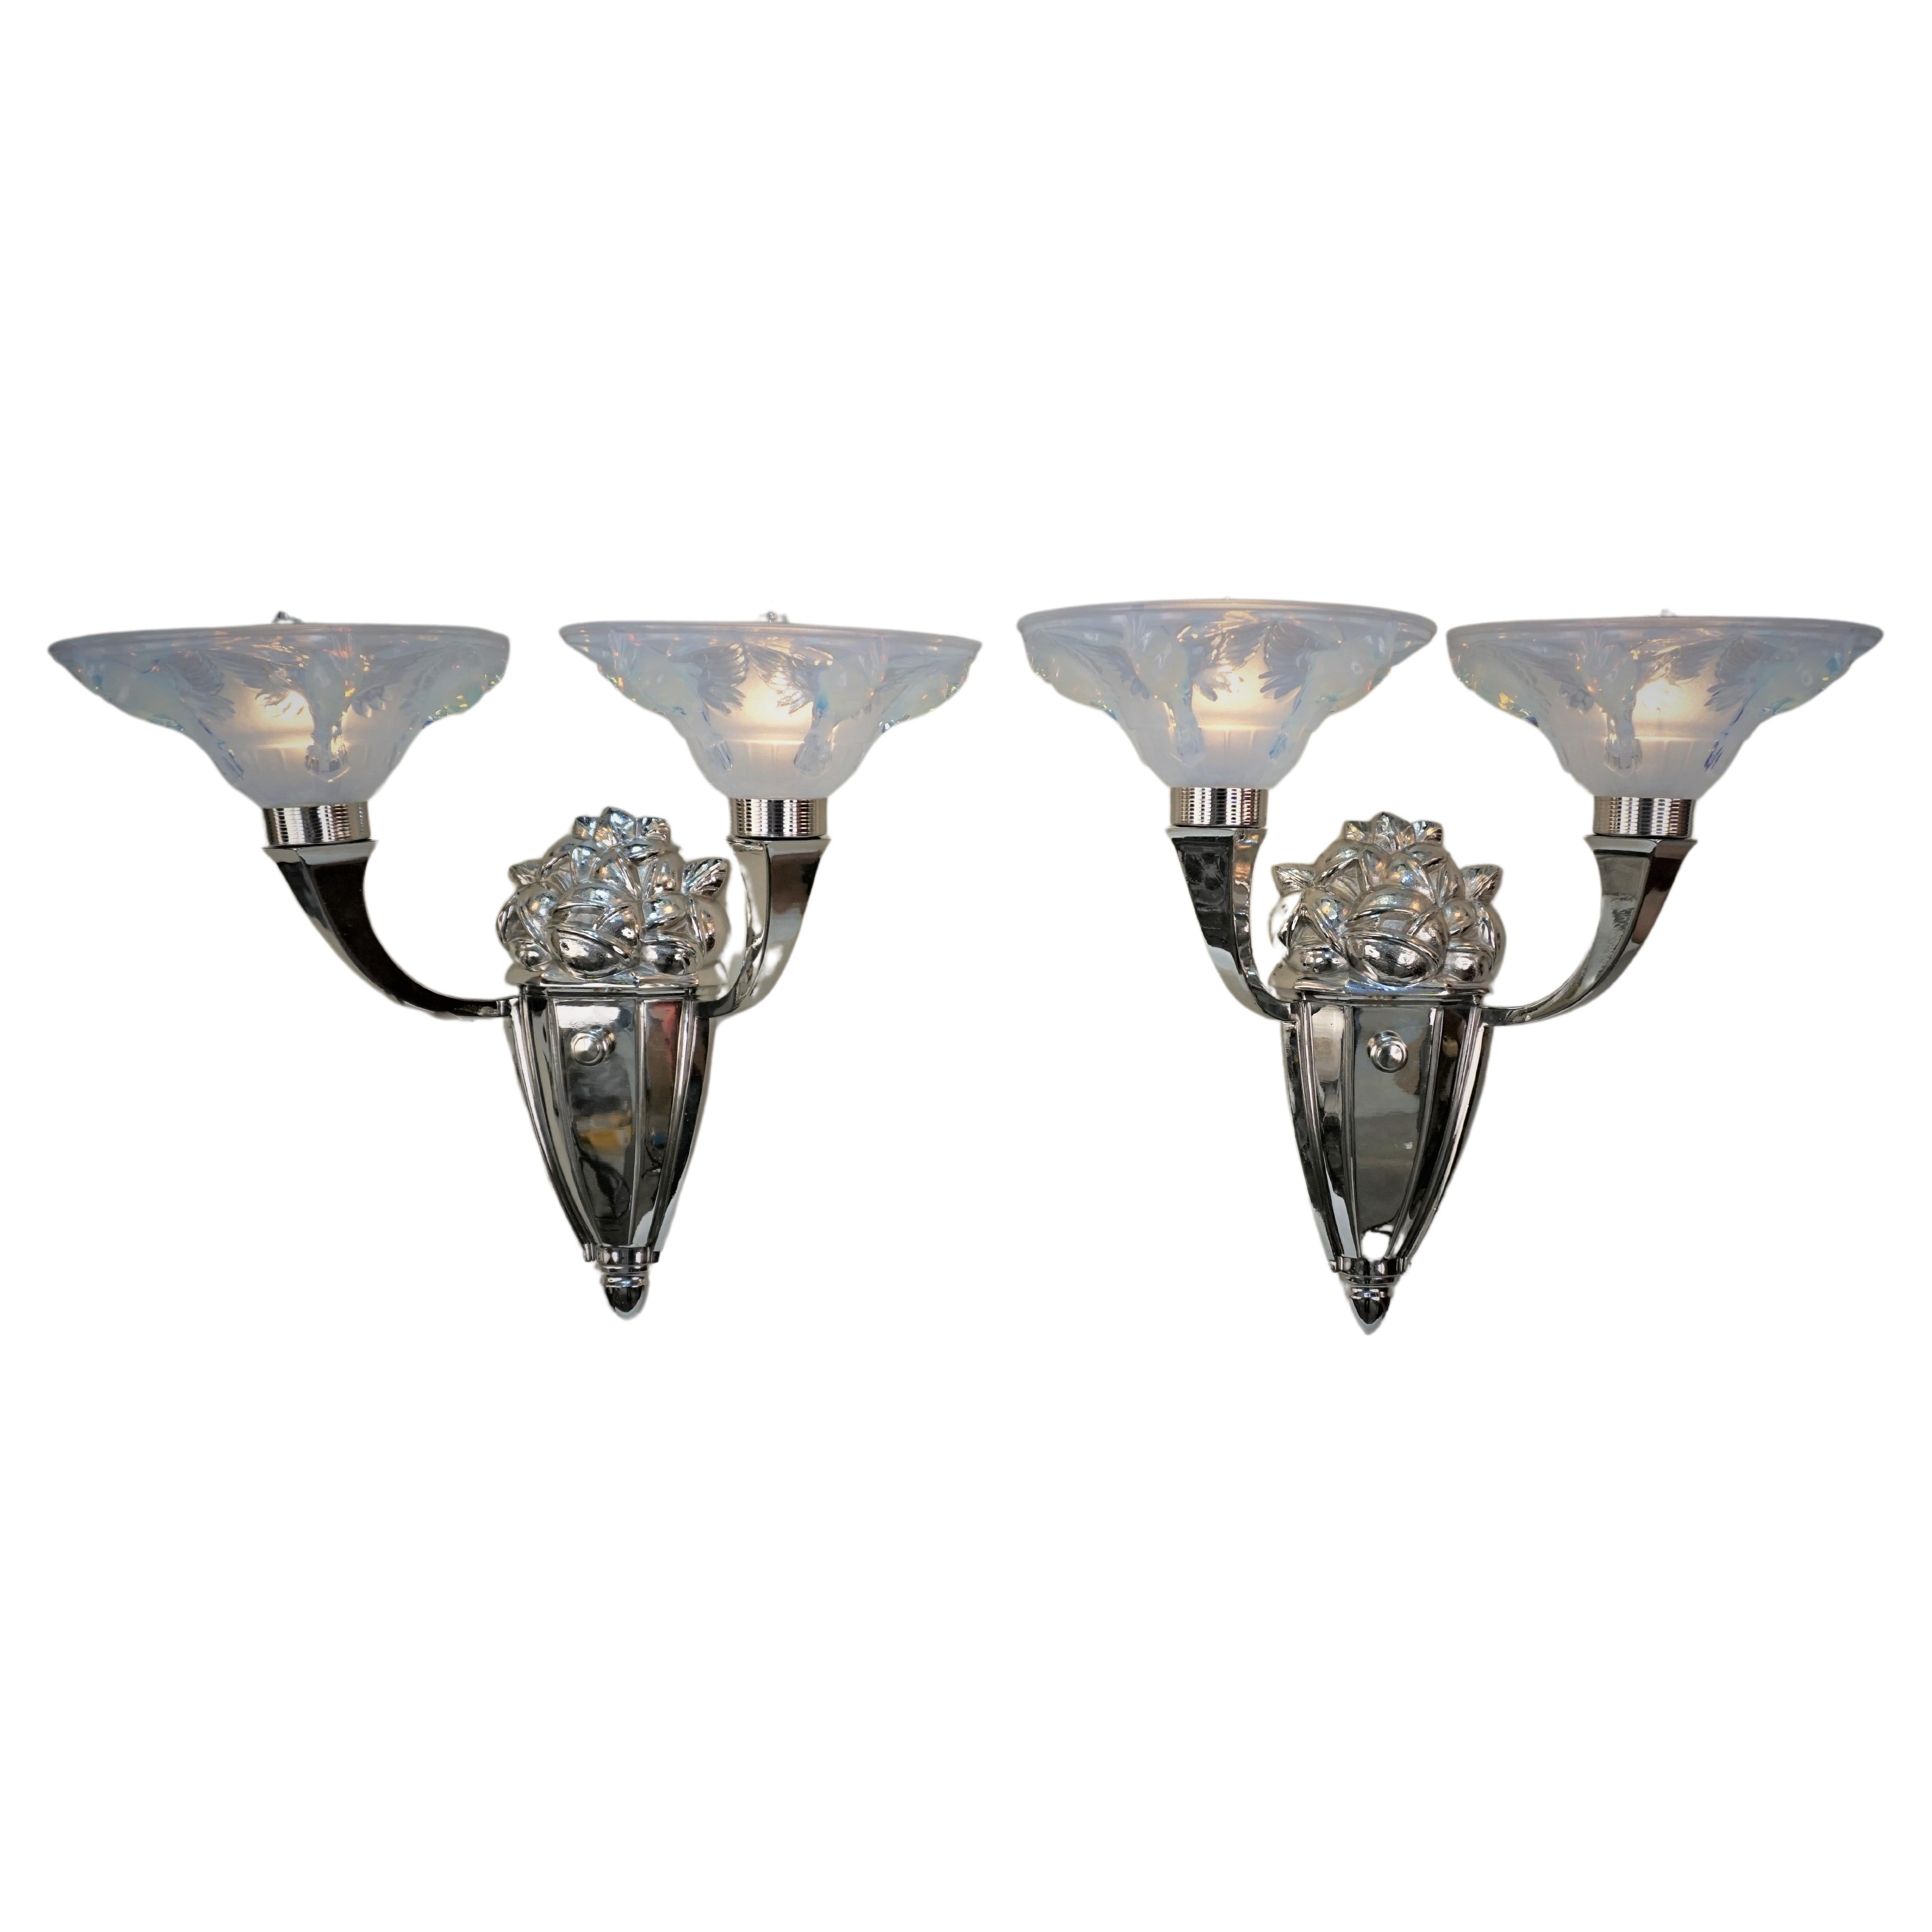 Pair of 1930s Art Deco Nickel Wall Sconces with Design Glass by Boris Lacroix For Sale